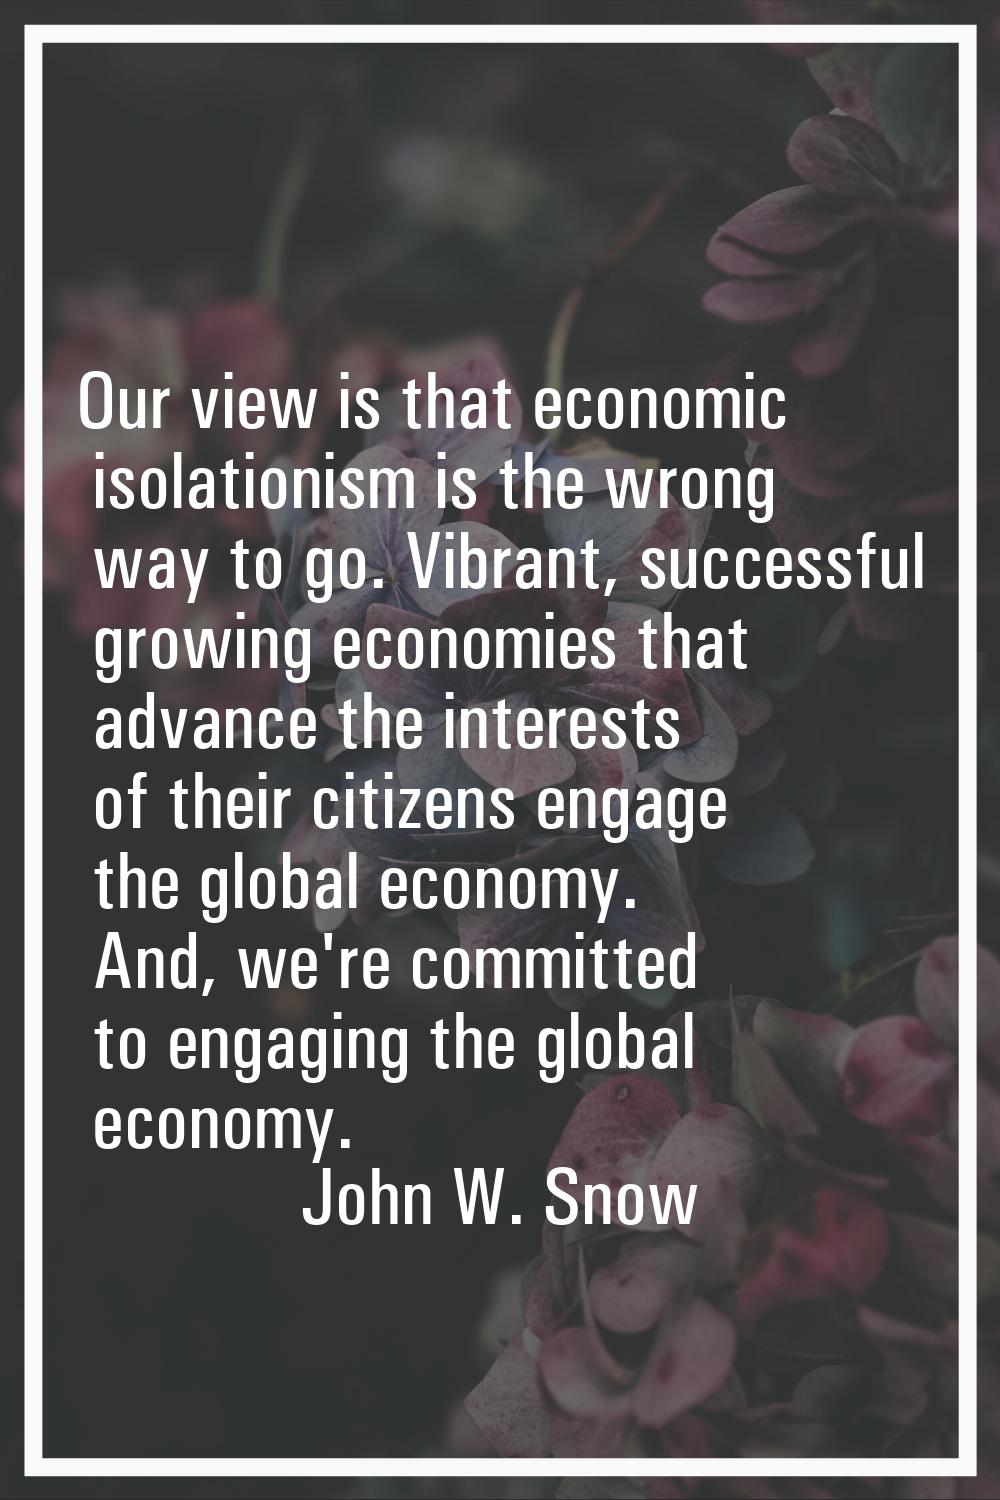 Our view is that economic isolationism is the wrong way to go. Vibrant, successful growing economie